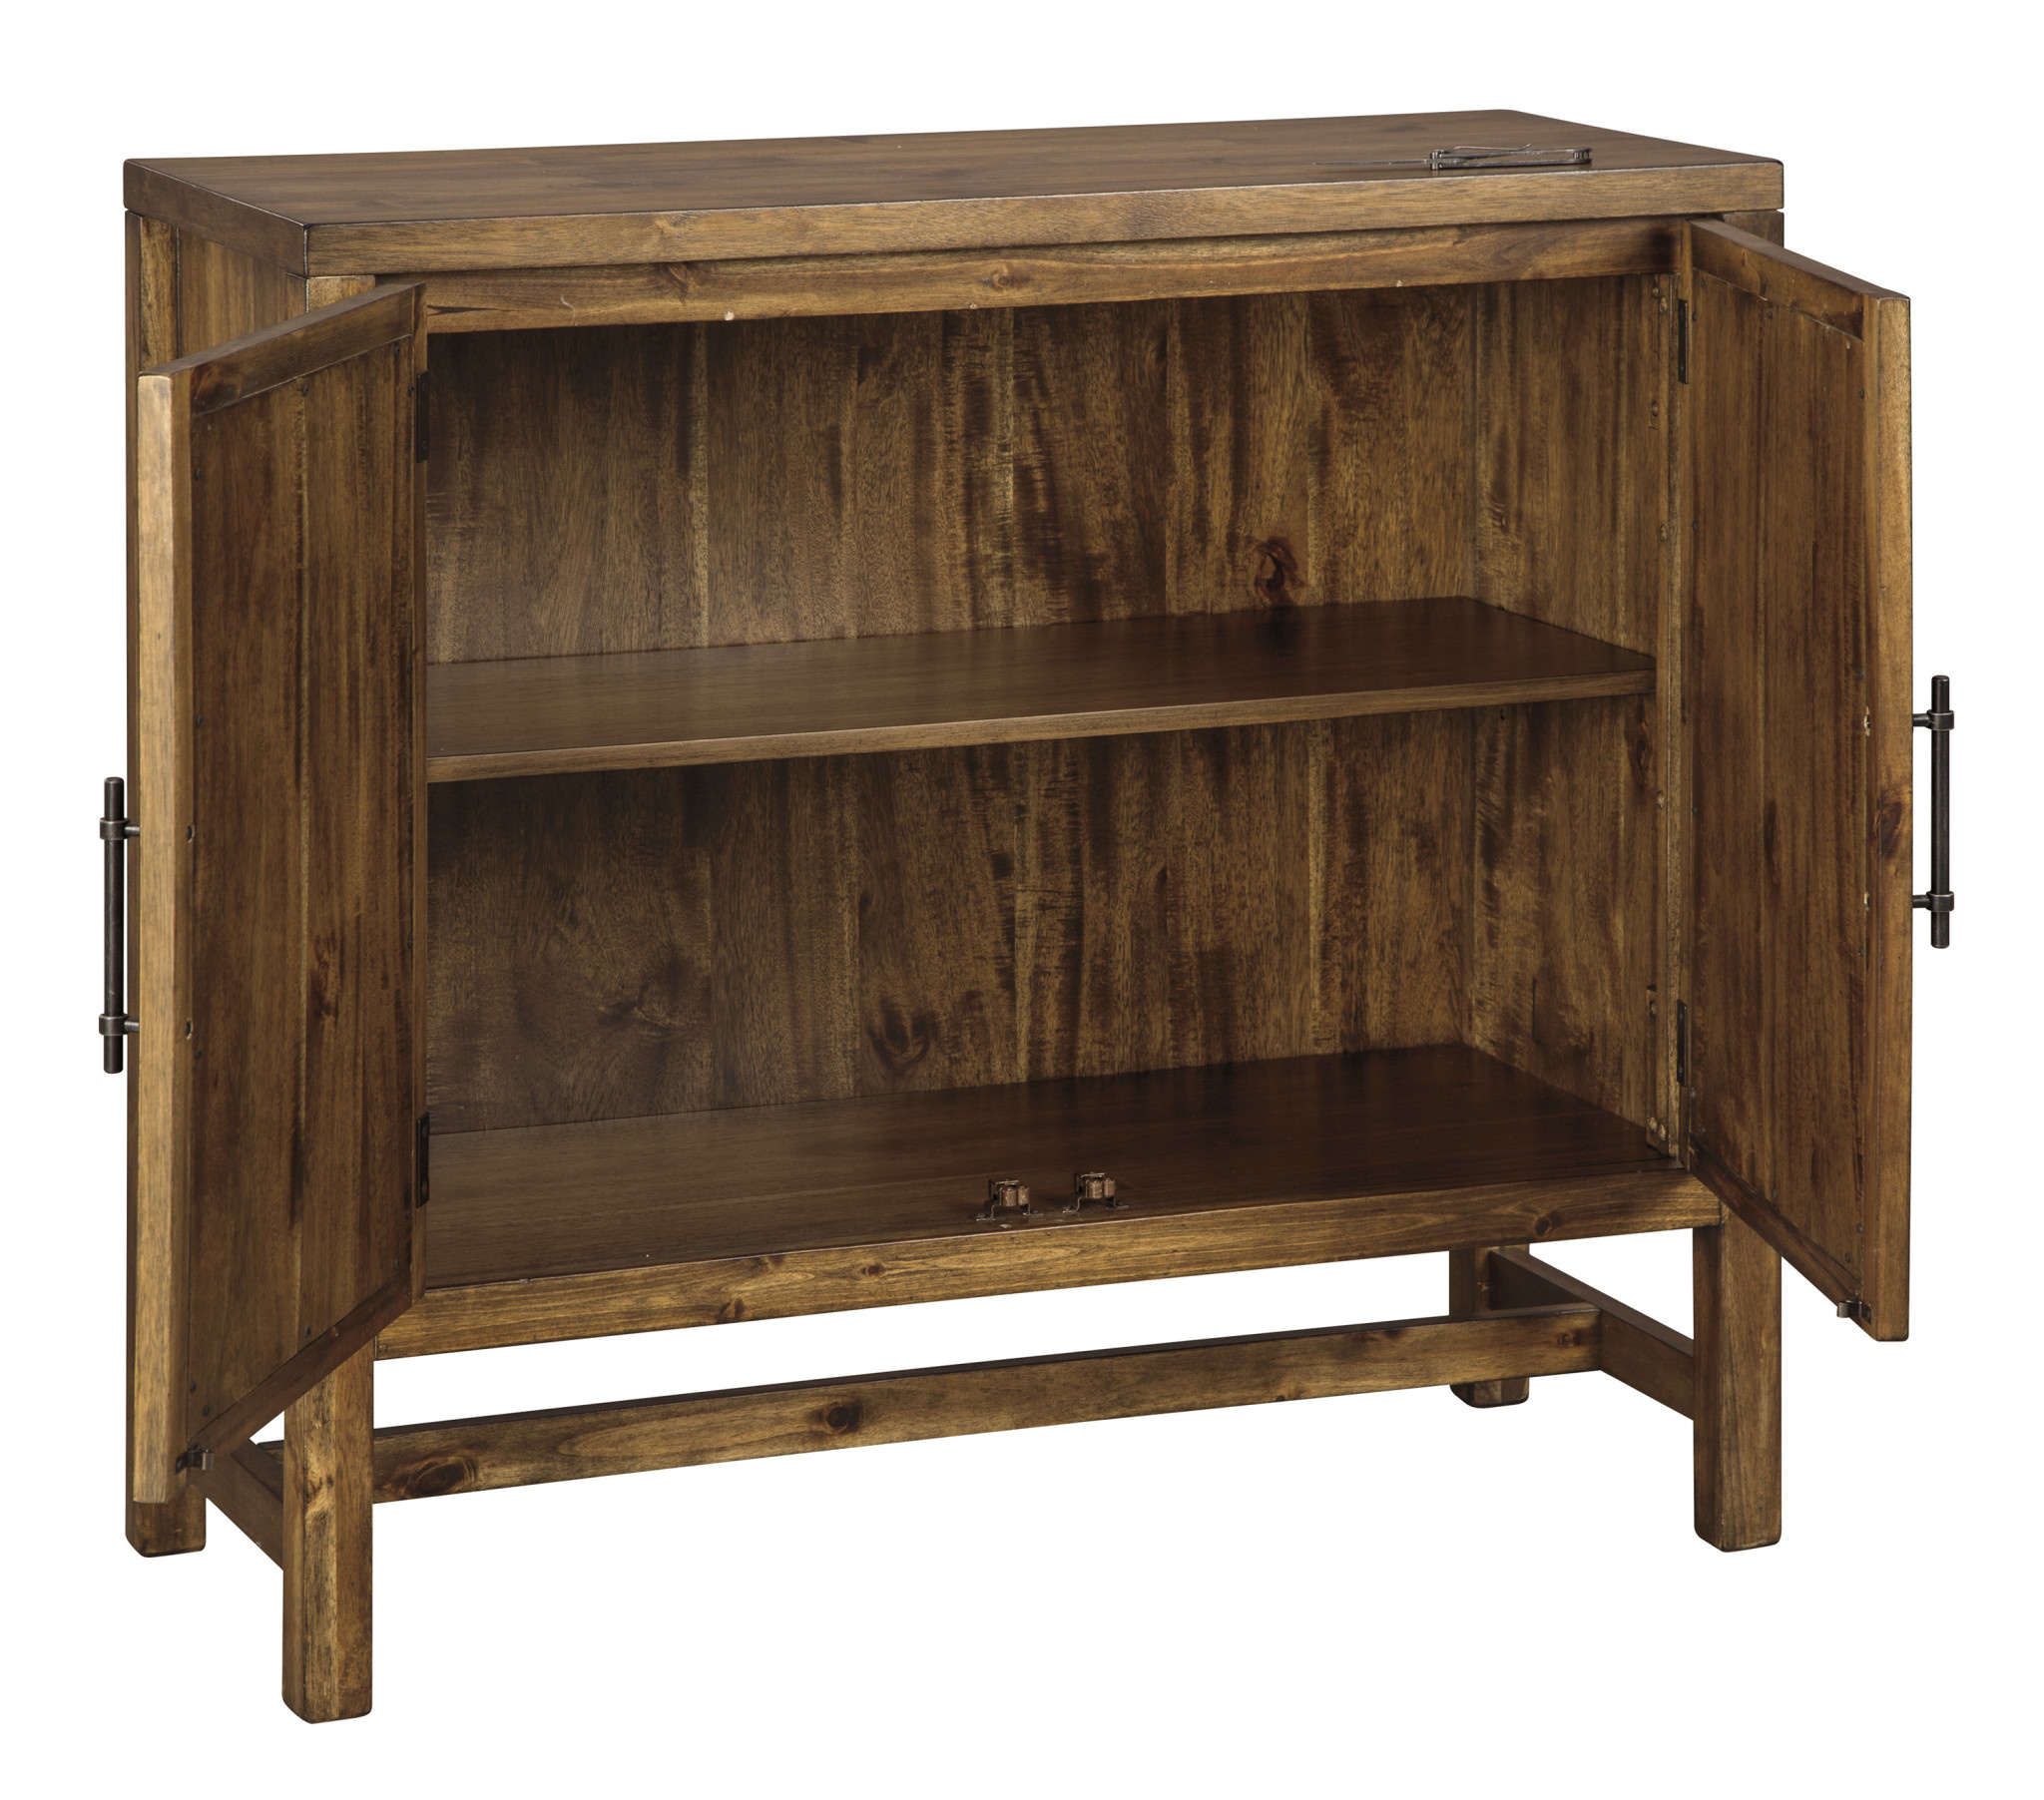 Signature Design Accent Cabinet- "Beckings" Brown A4000227